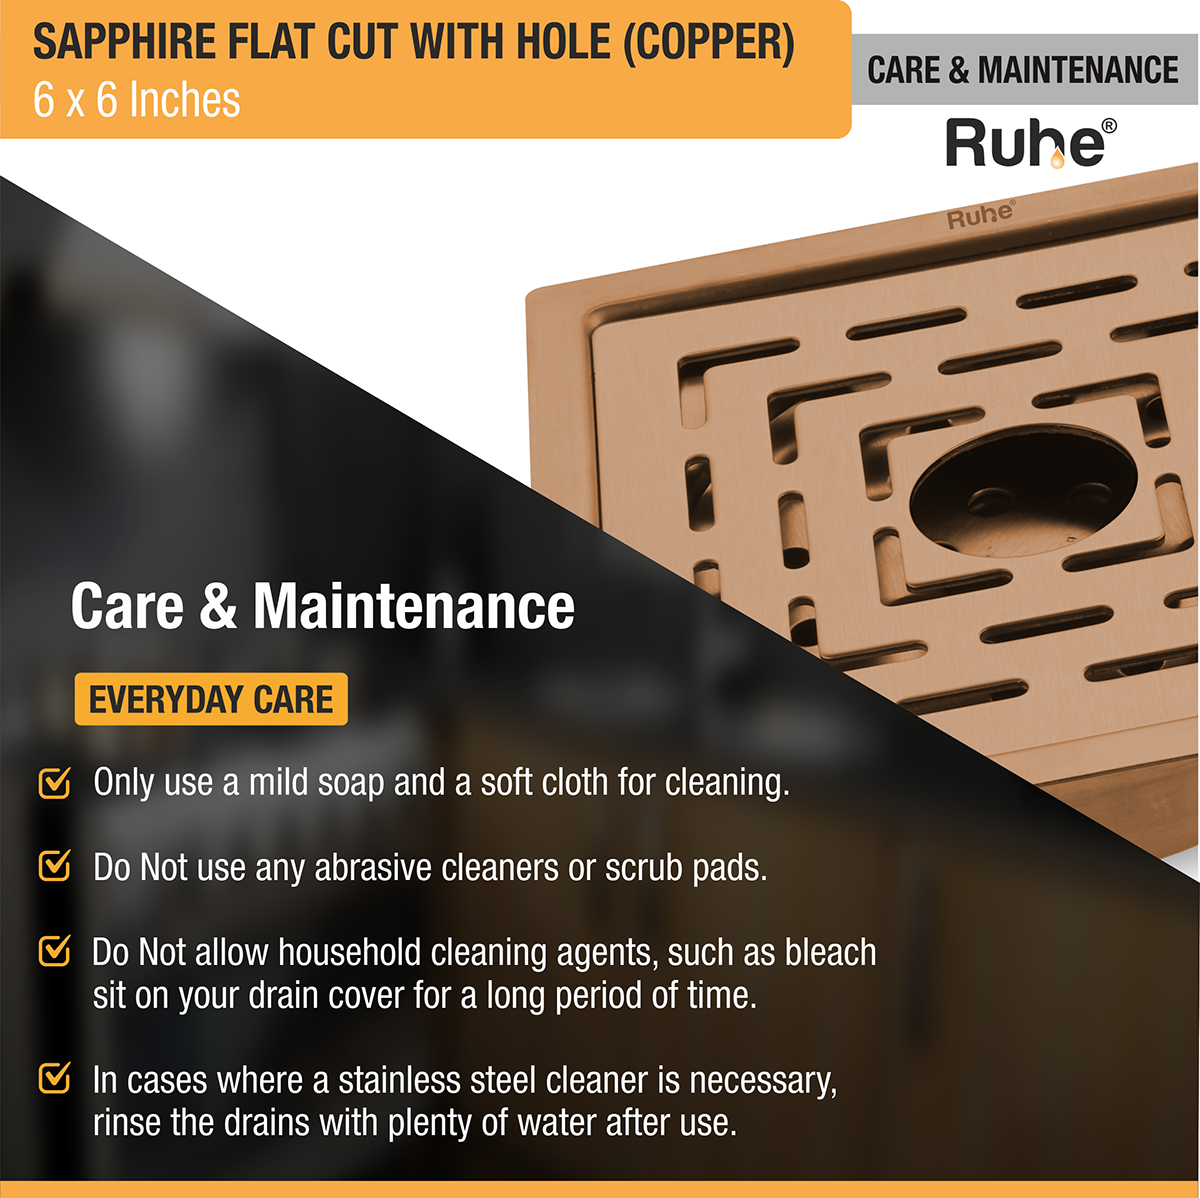 Sapphire Square Flat Cut Floor Drain in Antique Copper PVD Coating (6 x 6 Inches) with Hole care and maintenance